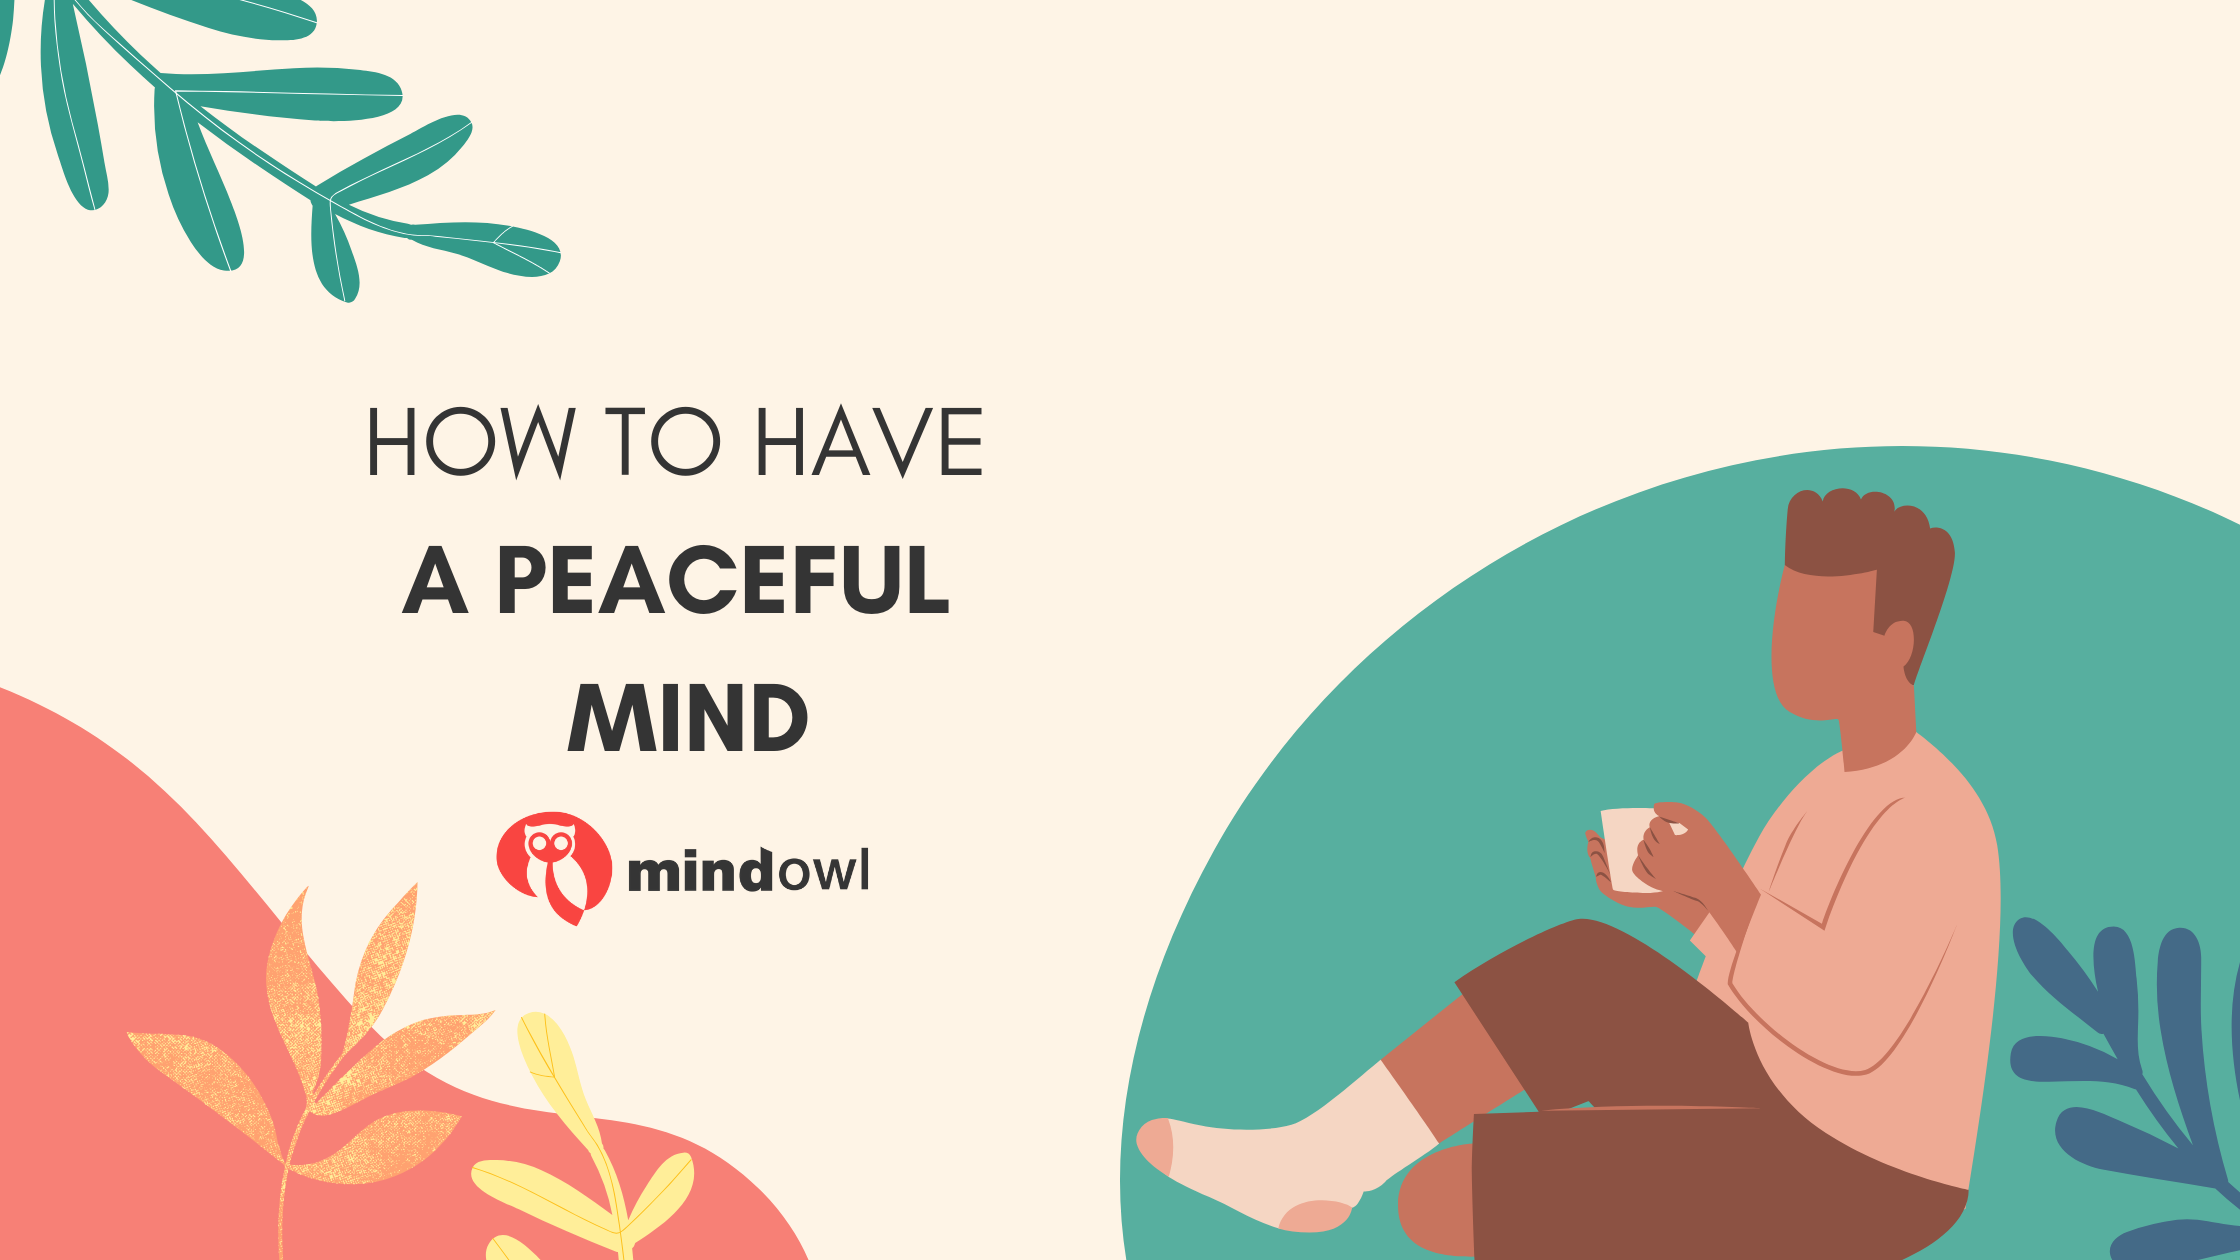 How to have a peaceful mind